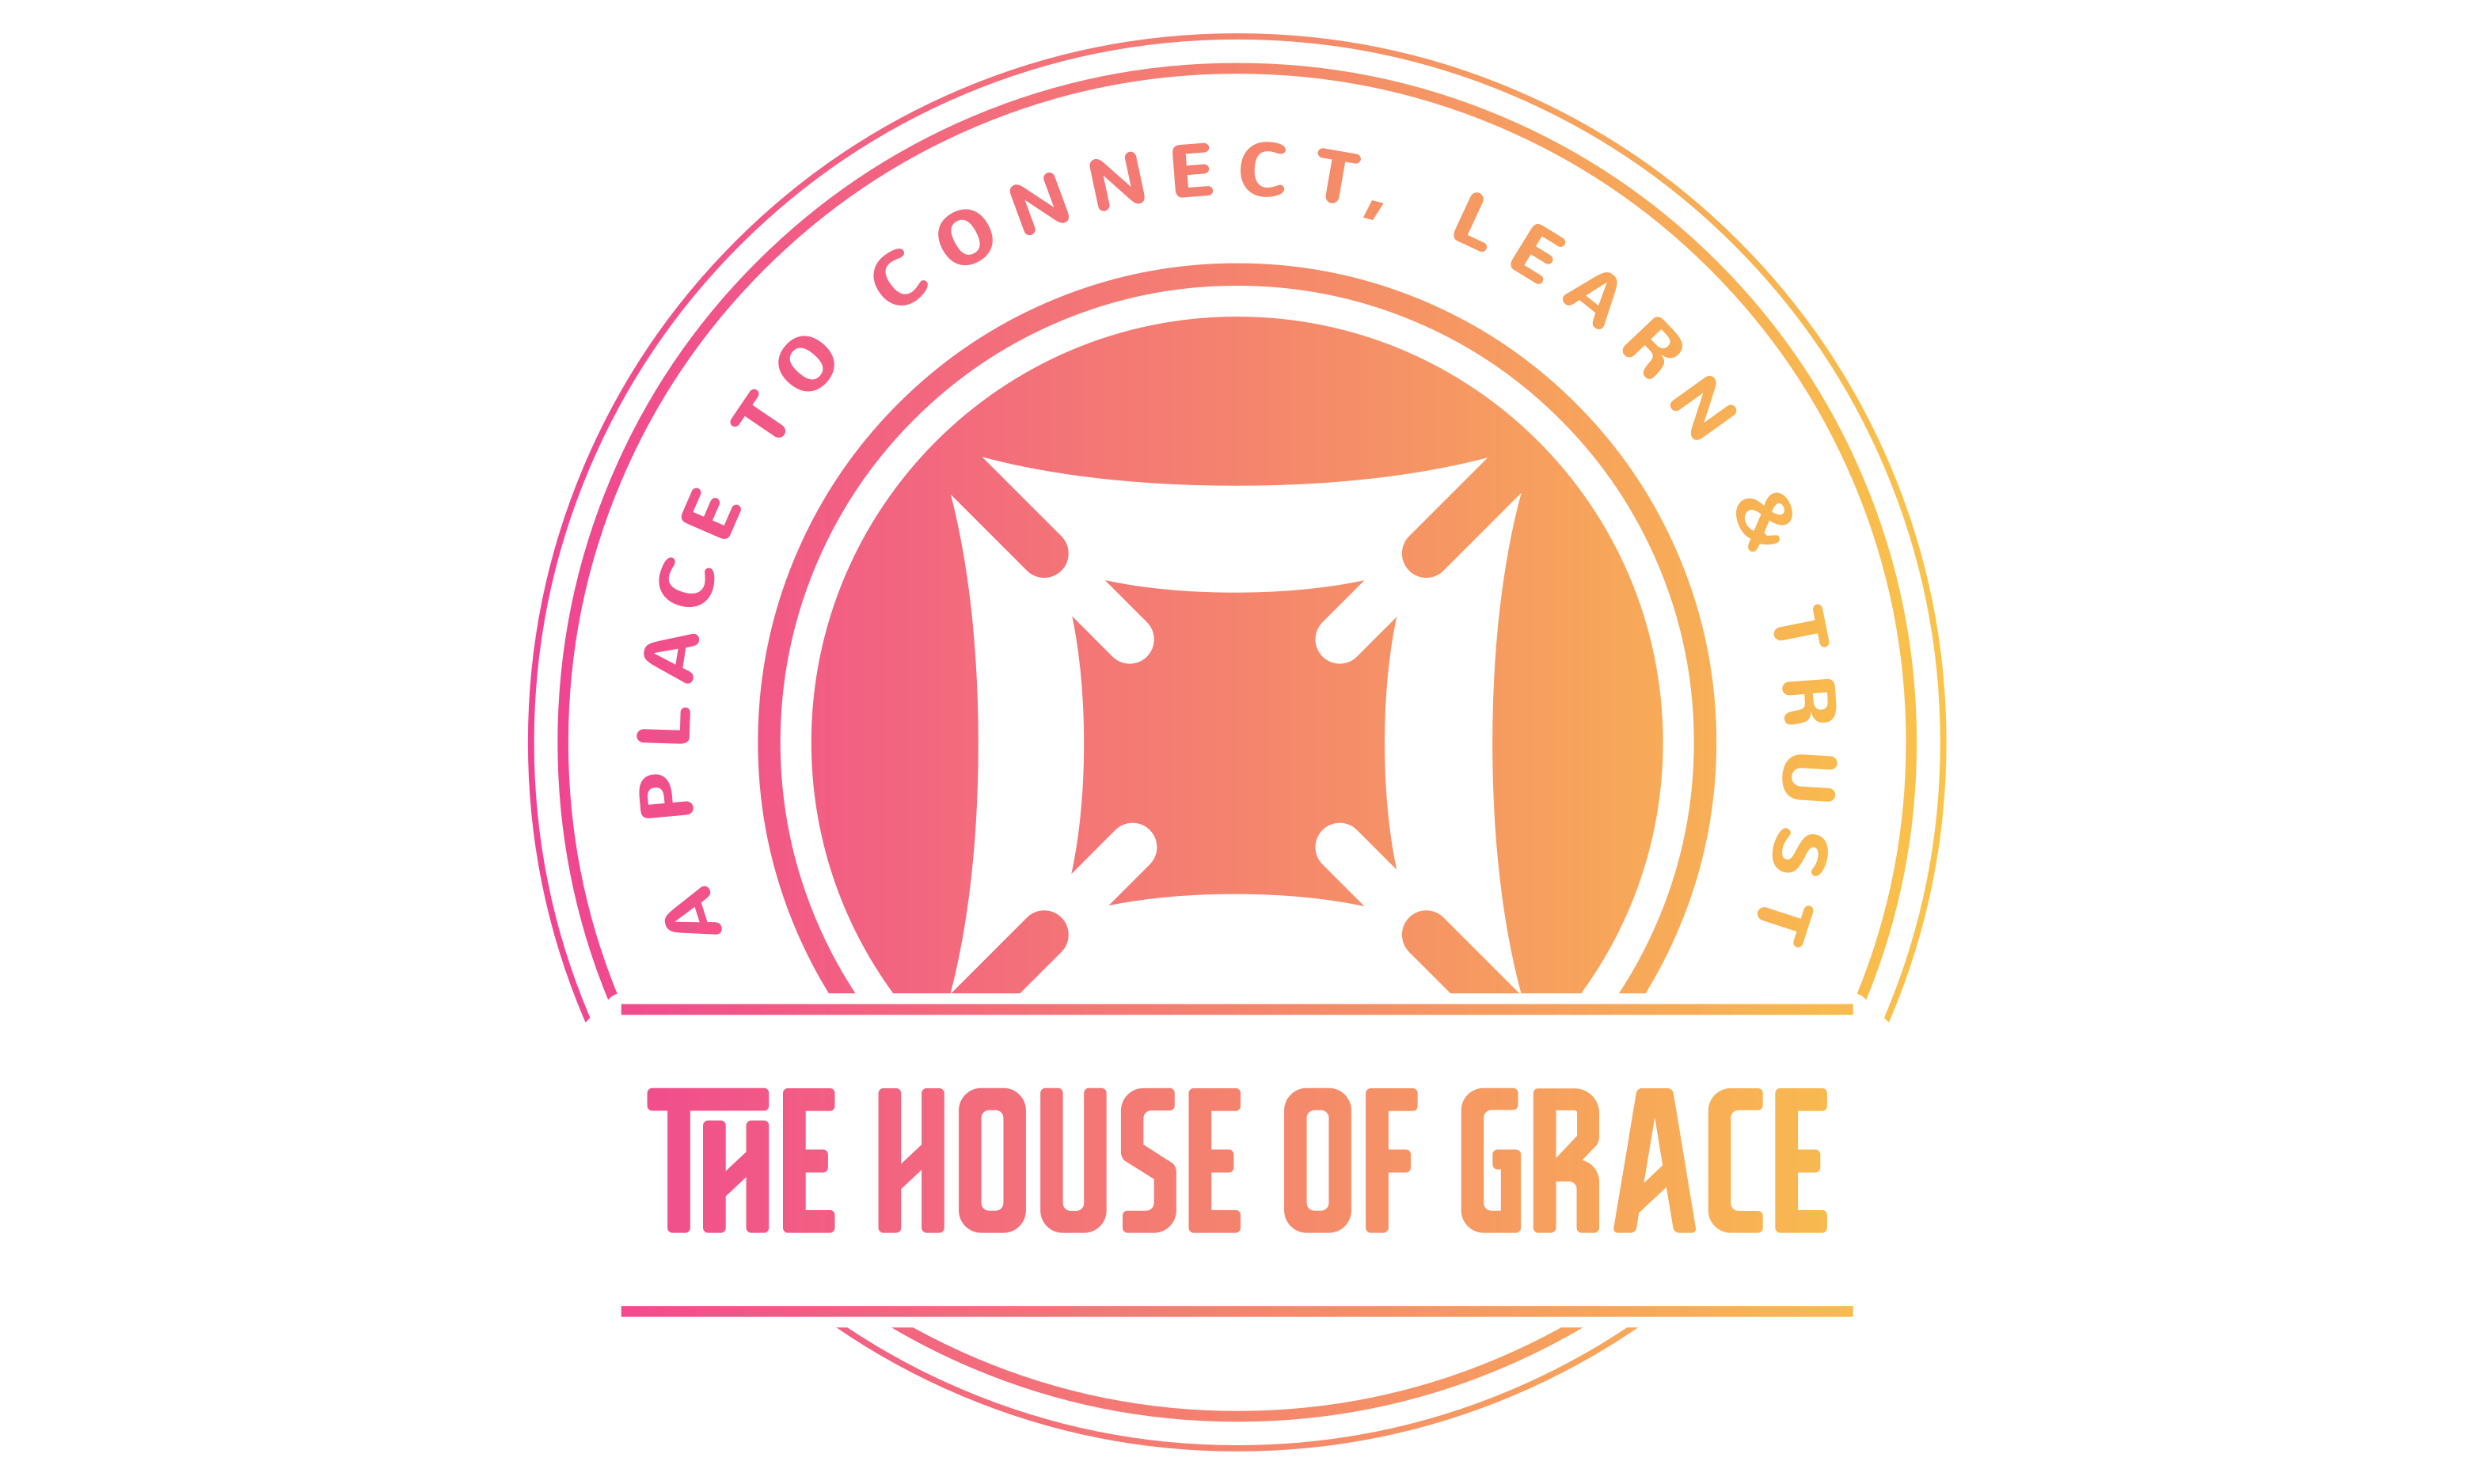 The House of Grace